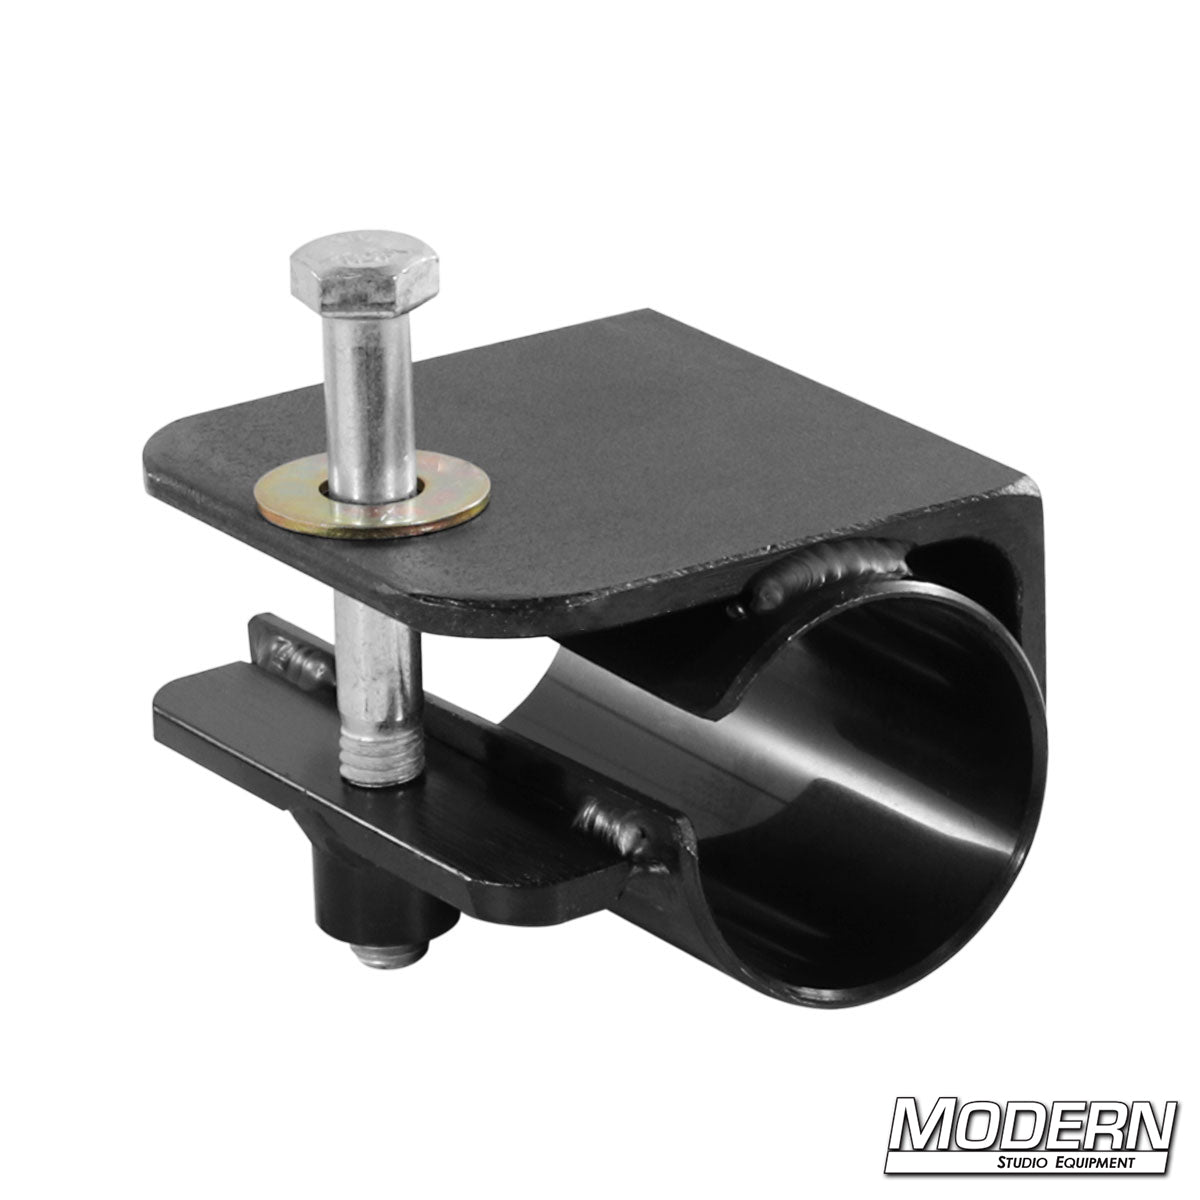 Hood Mount Leg Assembly Clamp for 1-1/4" Speed-Rail®